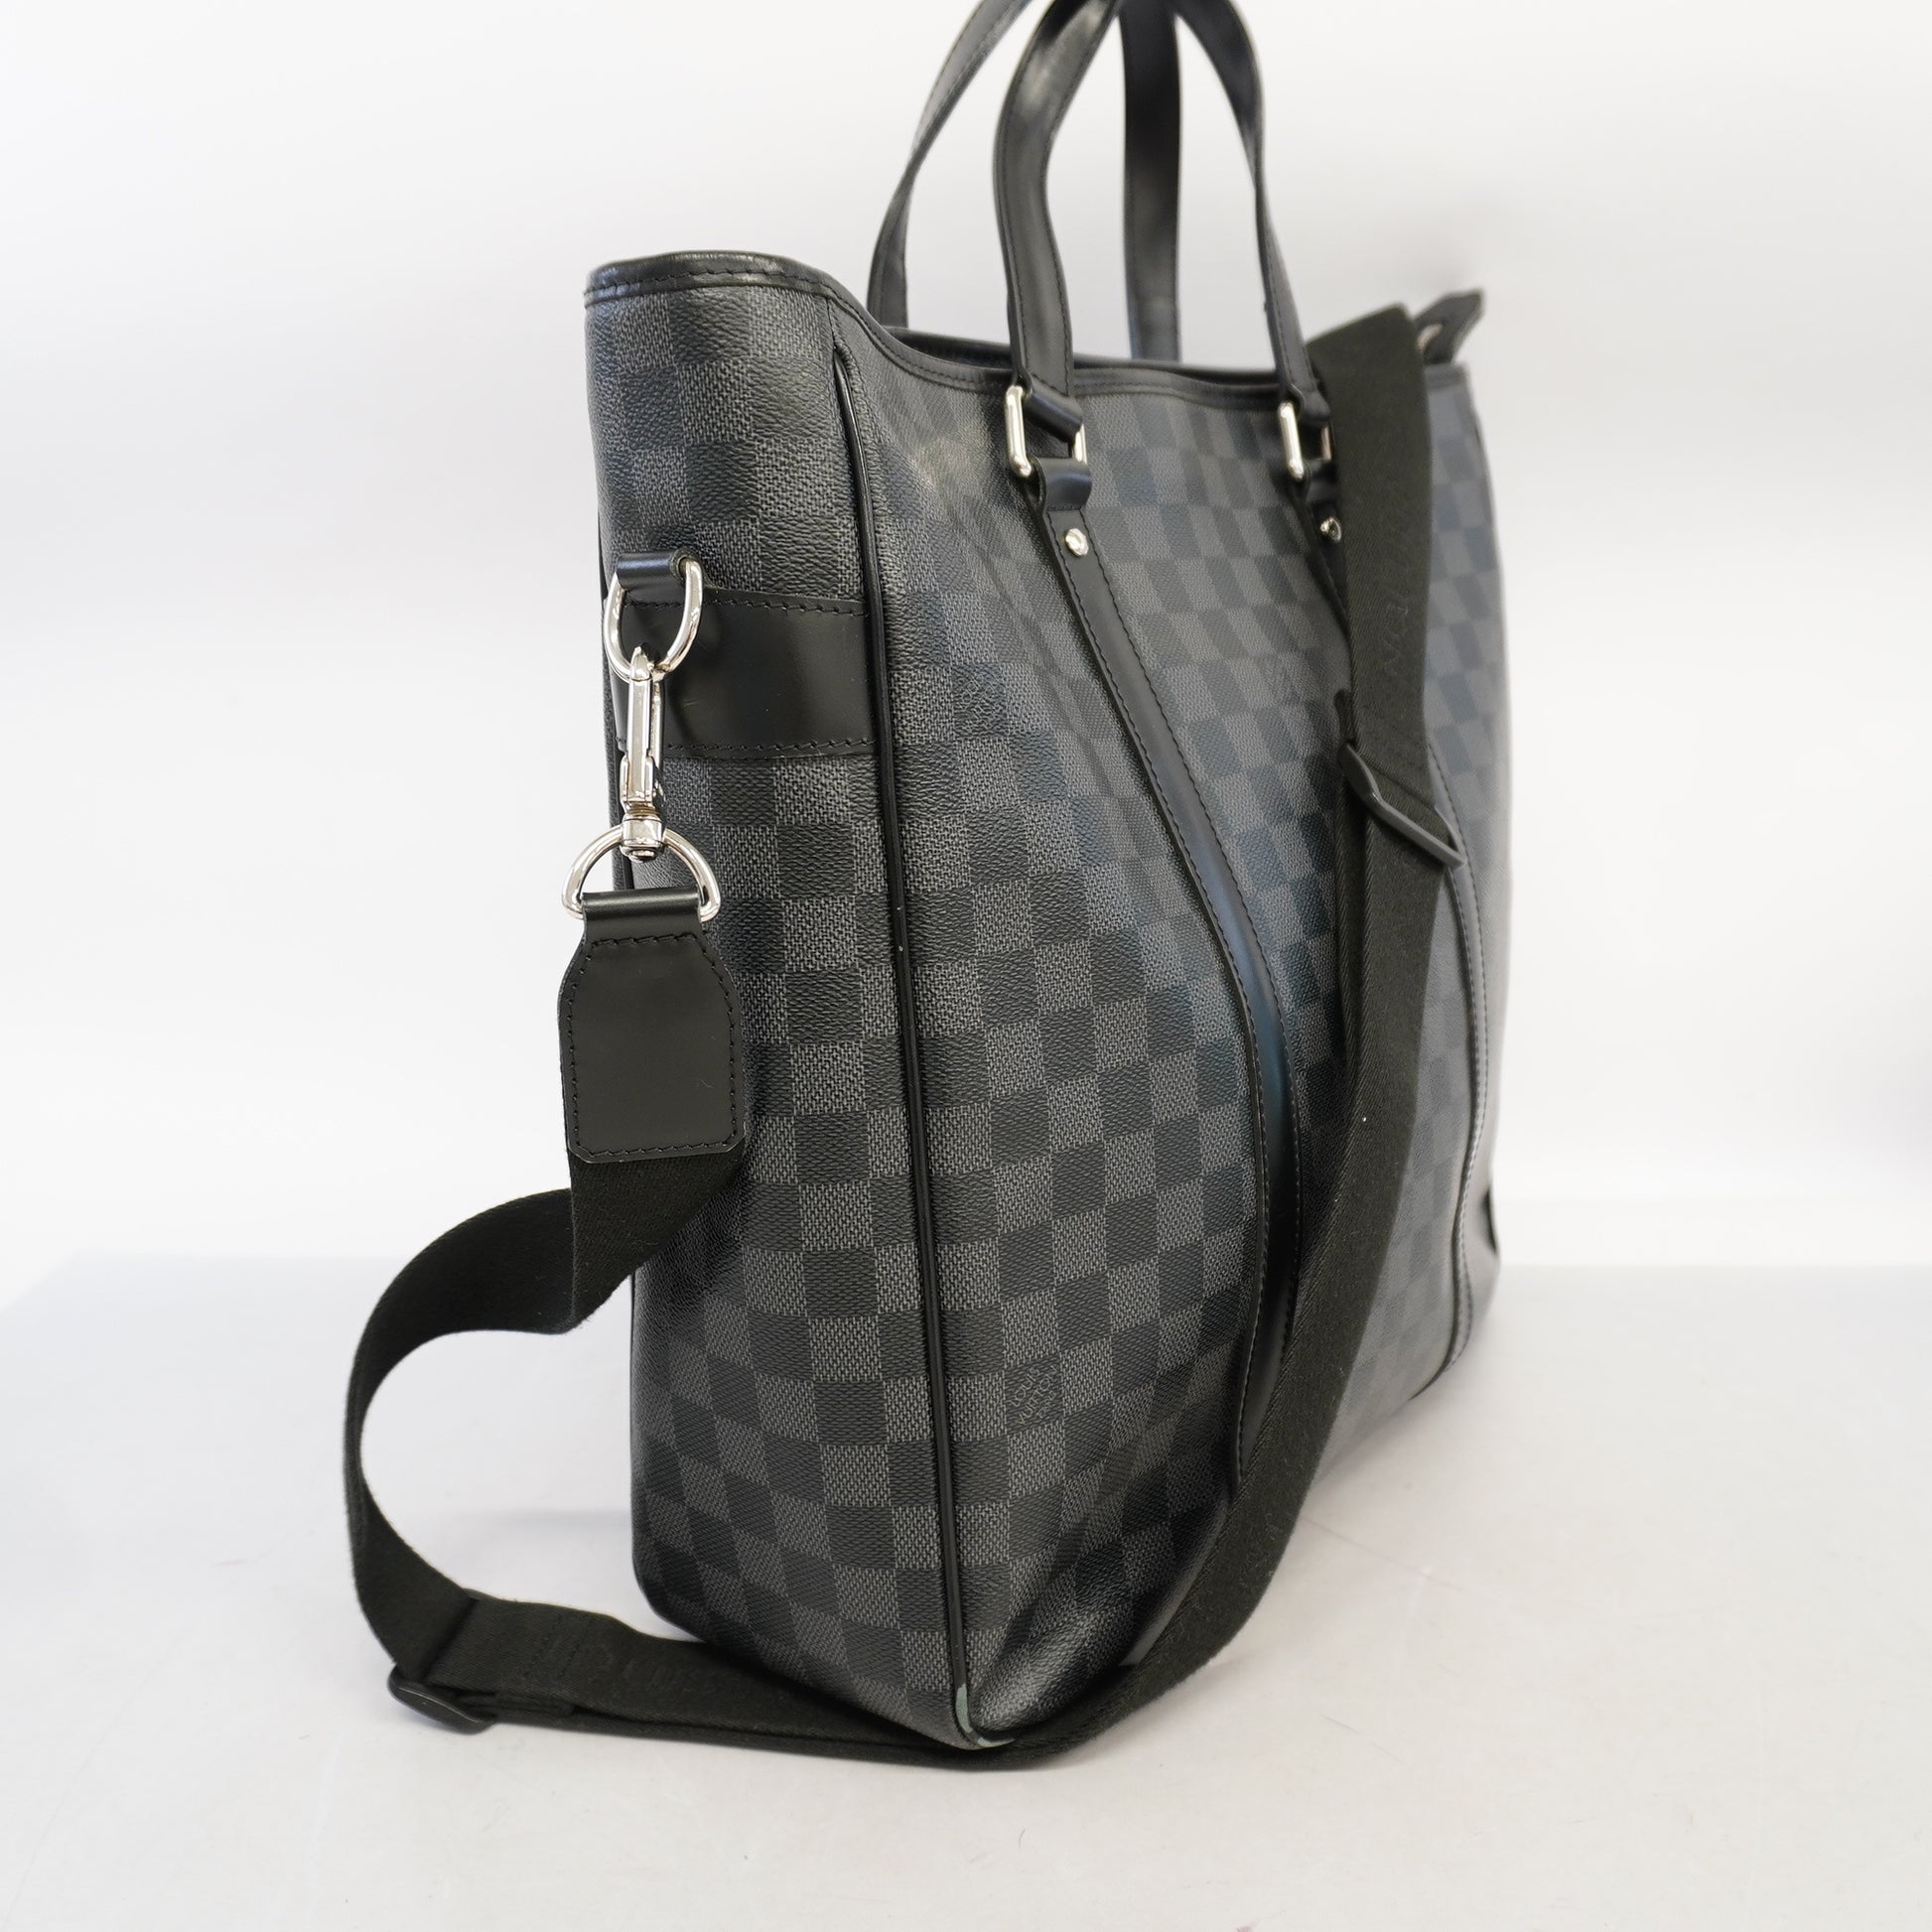 ALMOST NEW ! Louis Vuitton N51192 Damier Graphite Tadao Bag with Strap